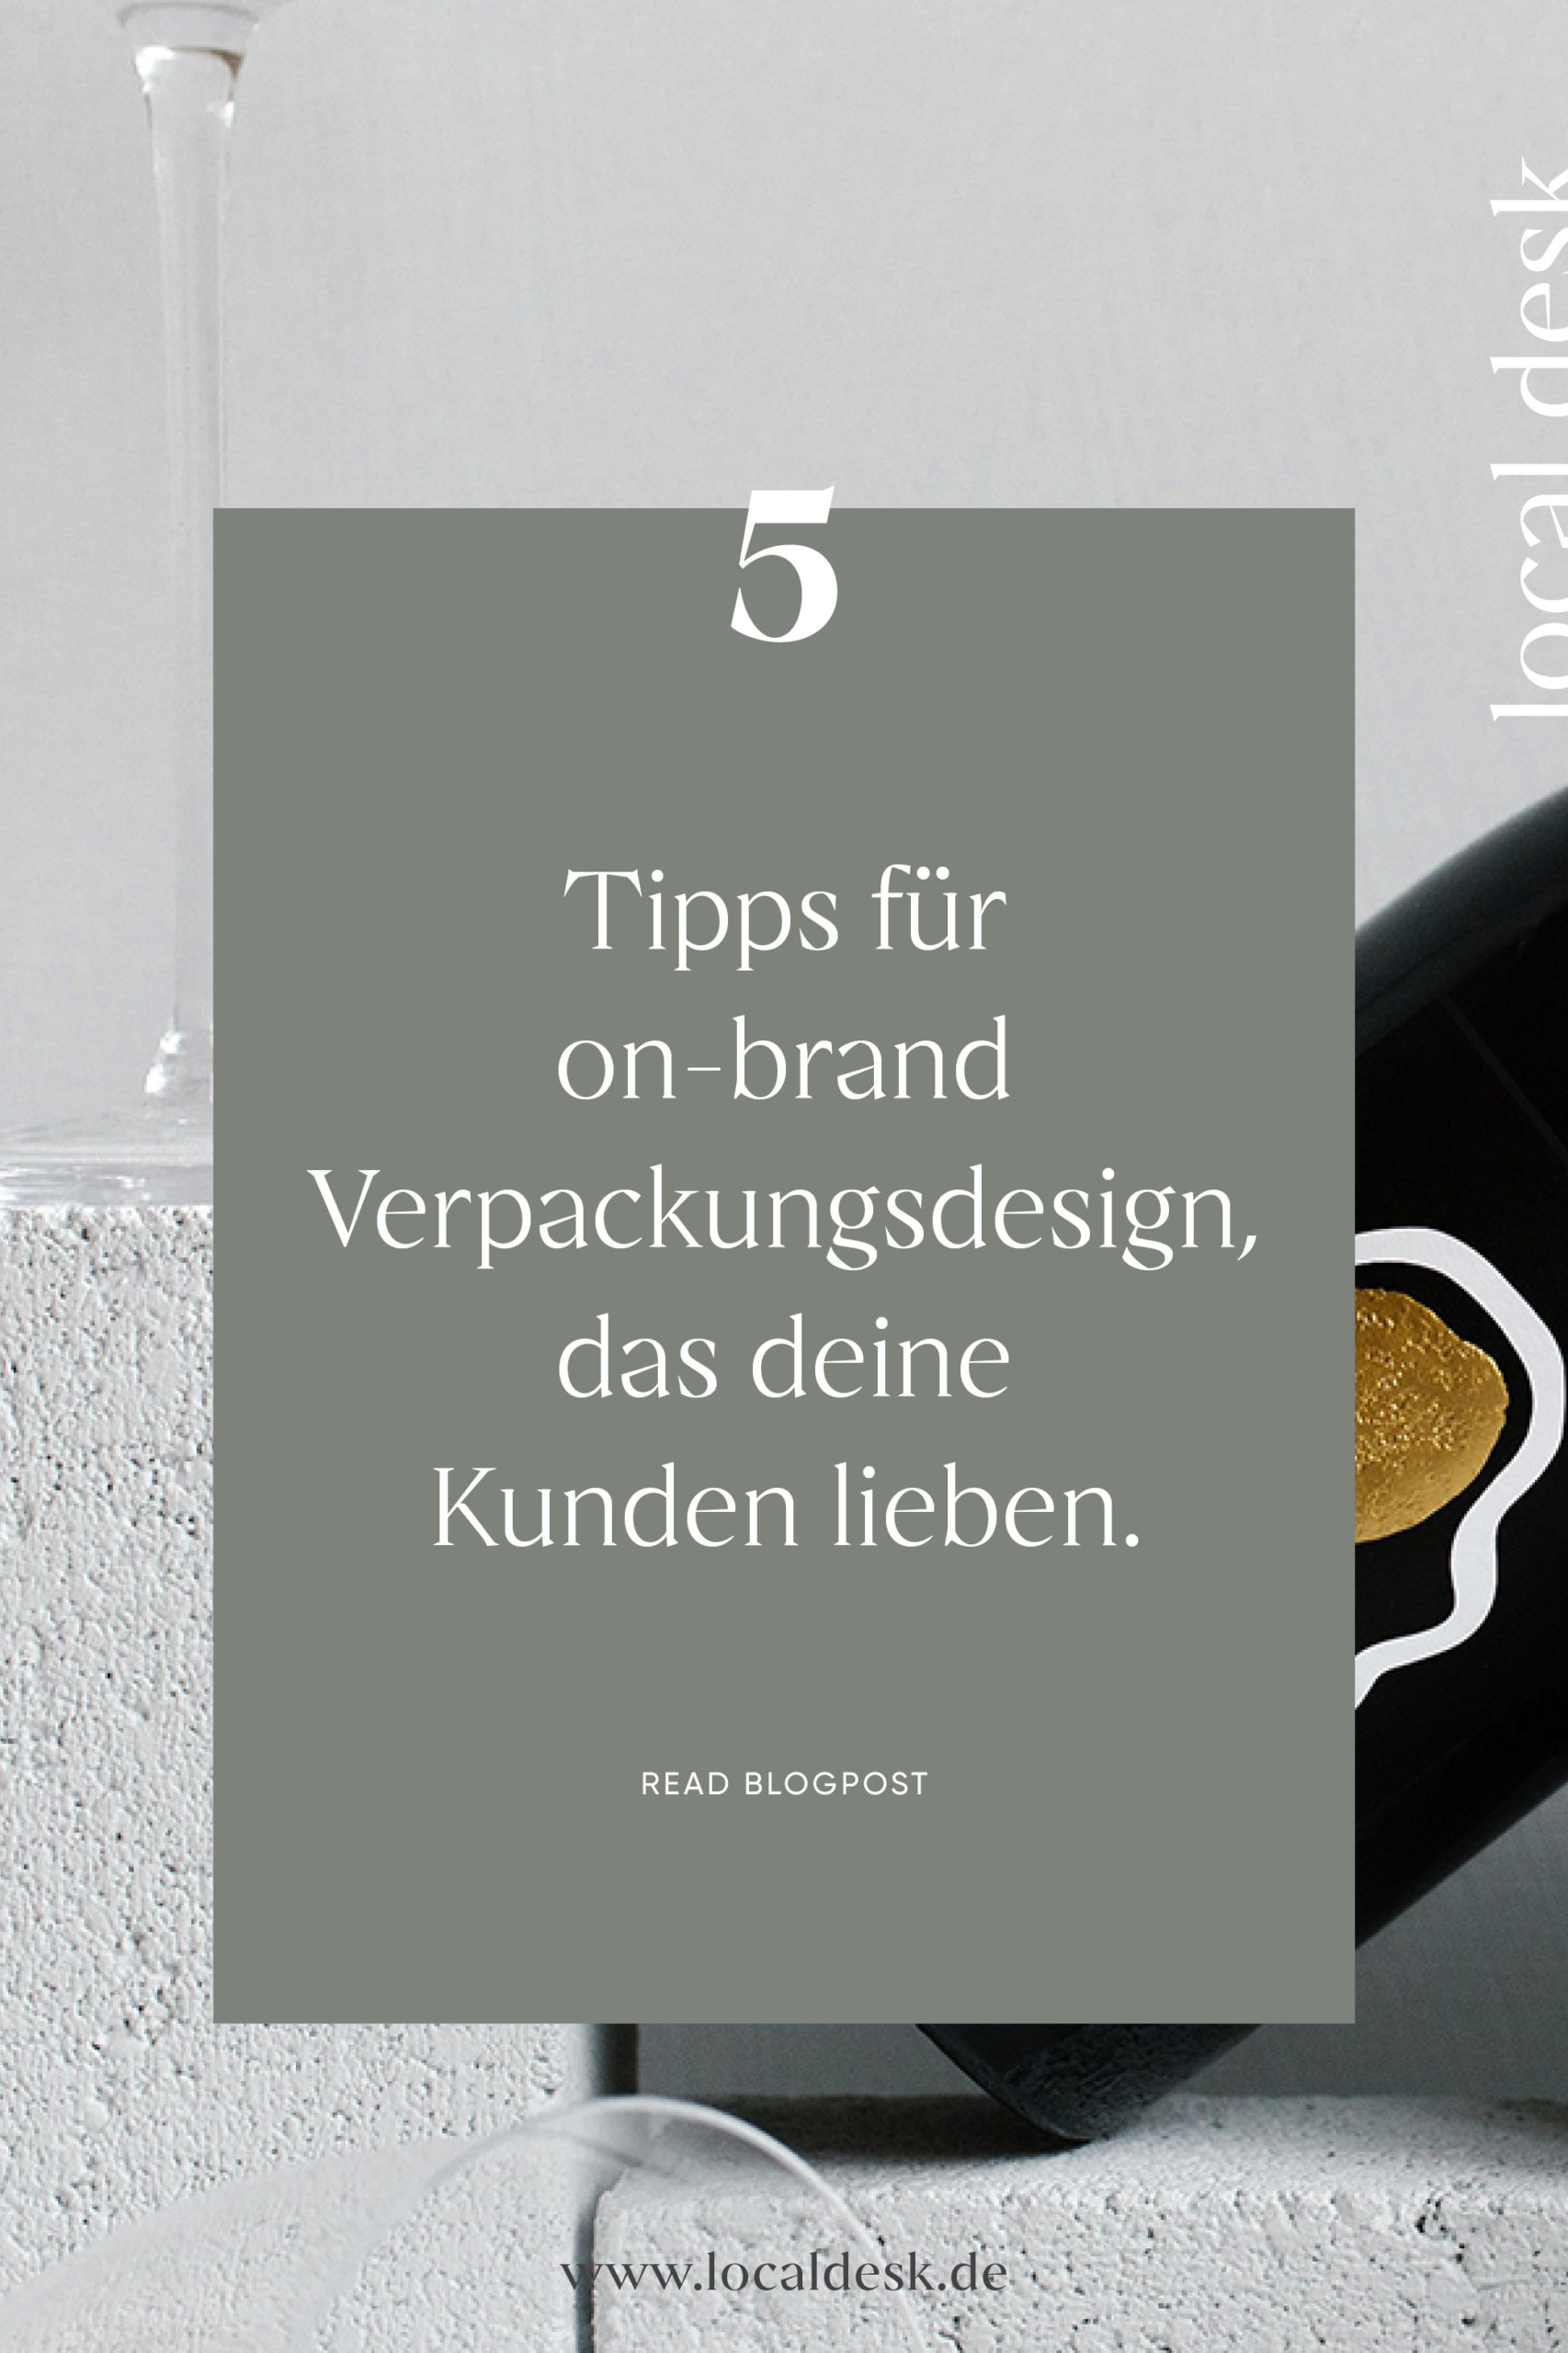 5 Tipps for on-brand Verpackungsdesign